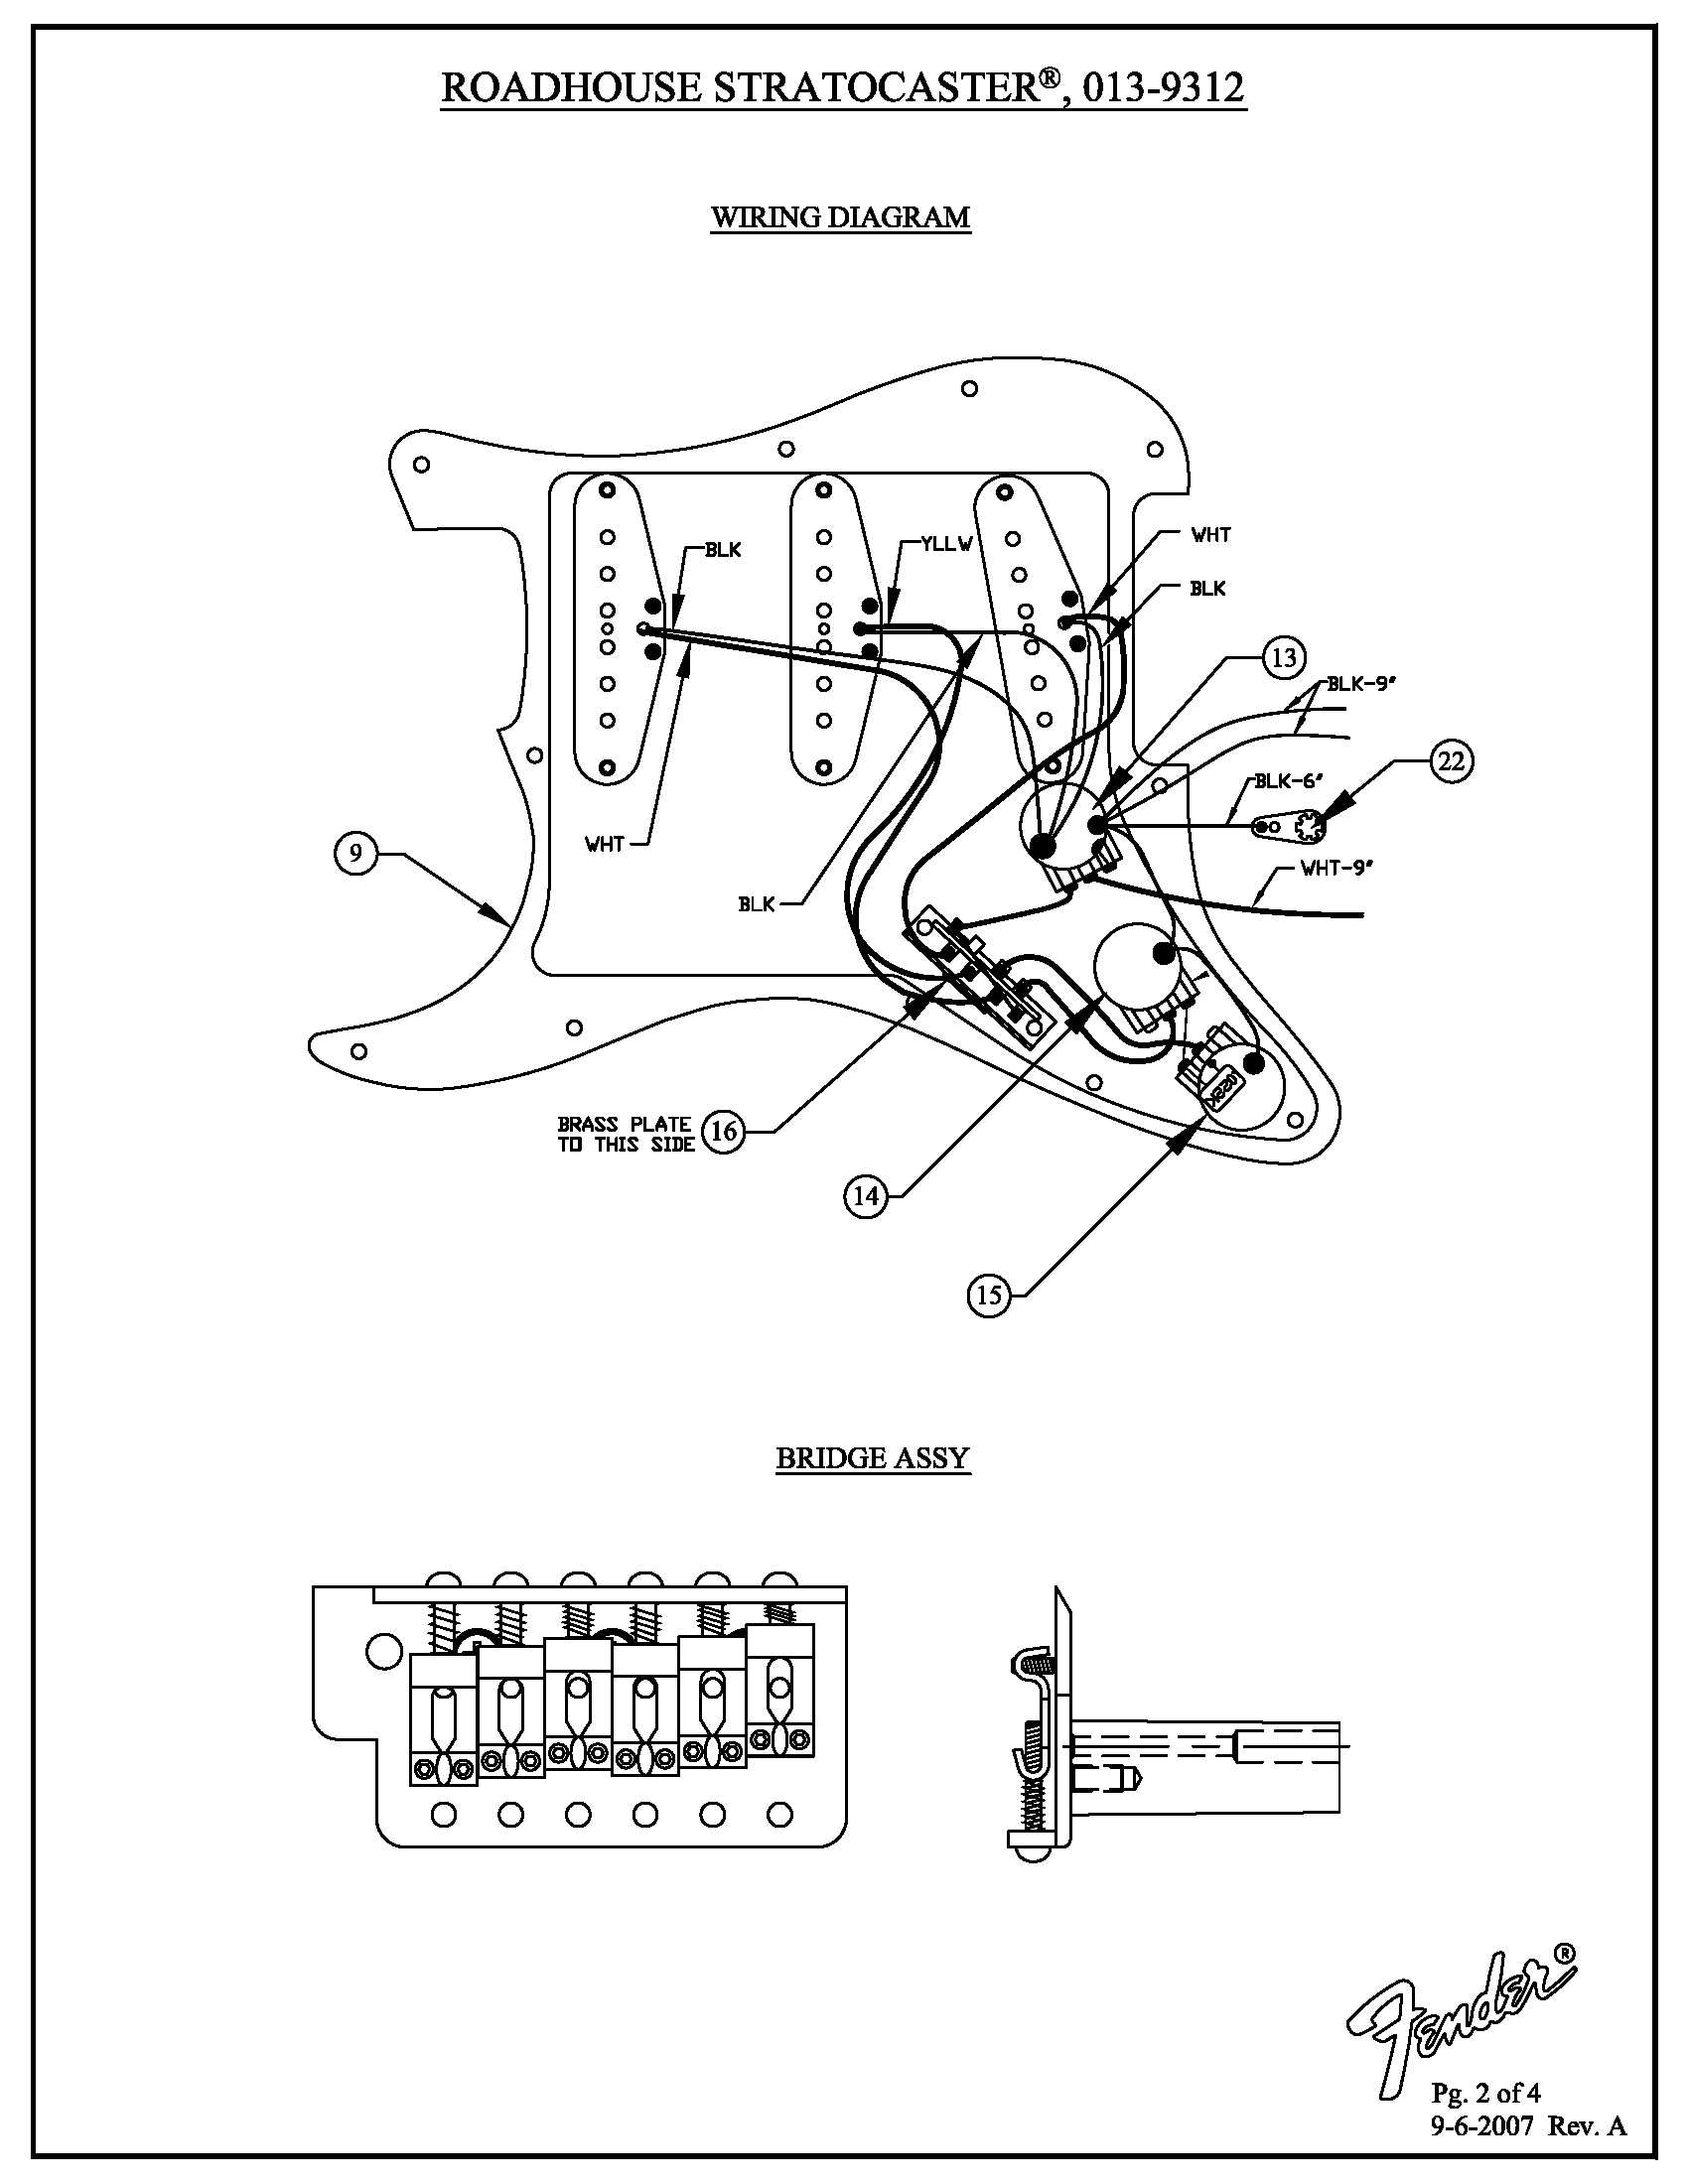 Deluxe Roadhouse Stratocaster Wiring Diagram 0139312 · Customer Self